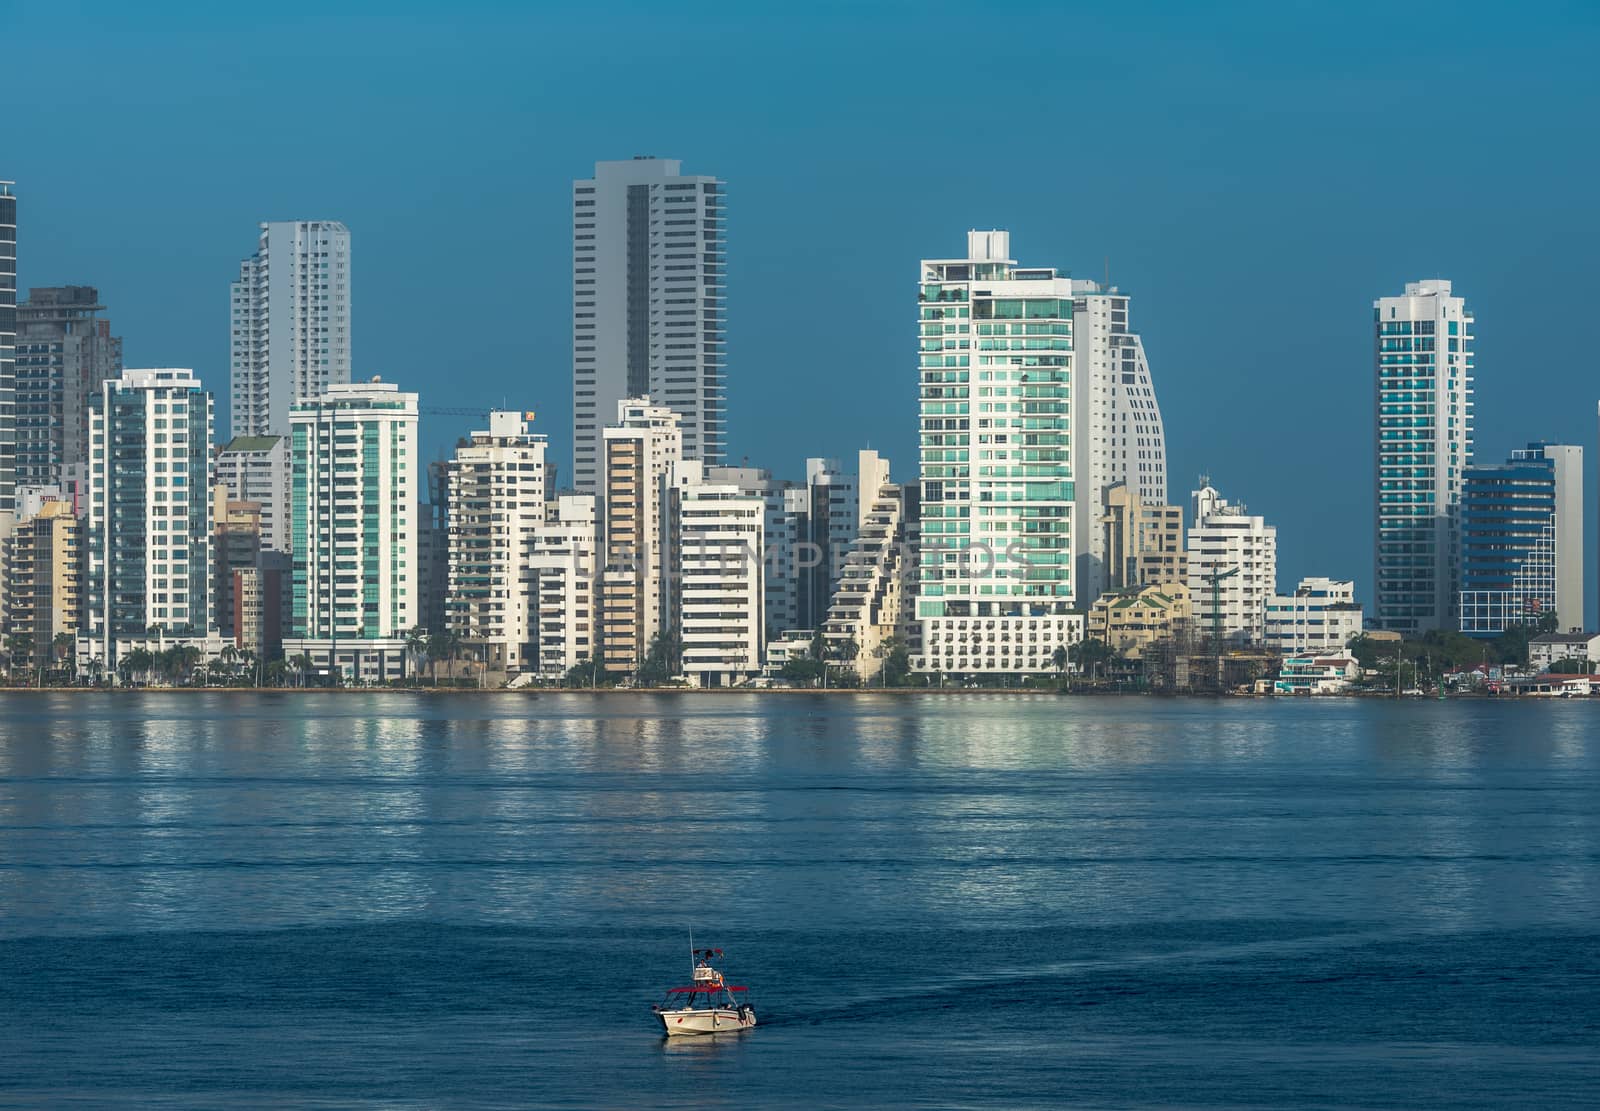 A small boat sails on the blue waters of Cartagena Bay with the city's skyscrapers gleaming in the background.